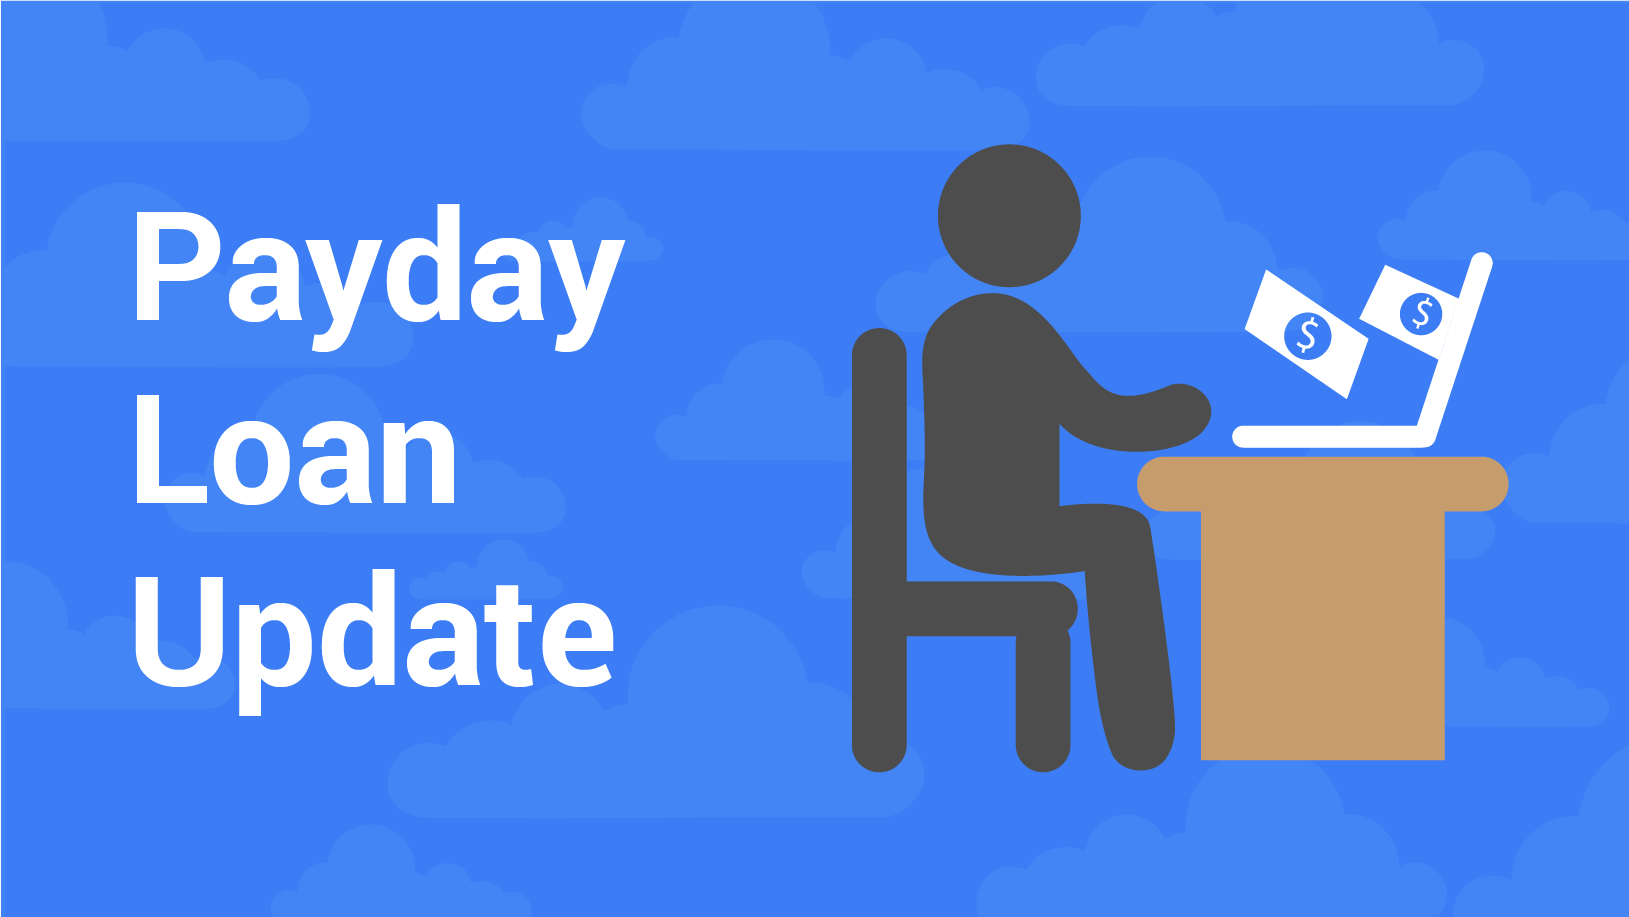 Google Payday loan update